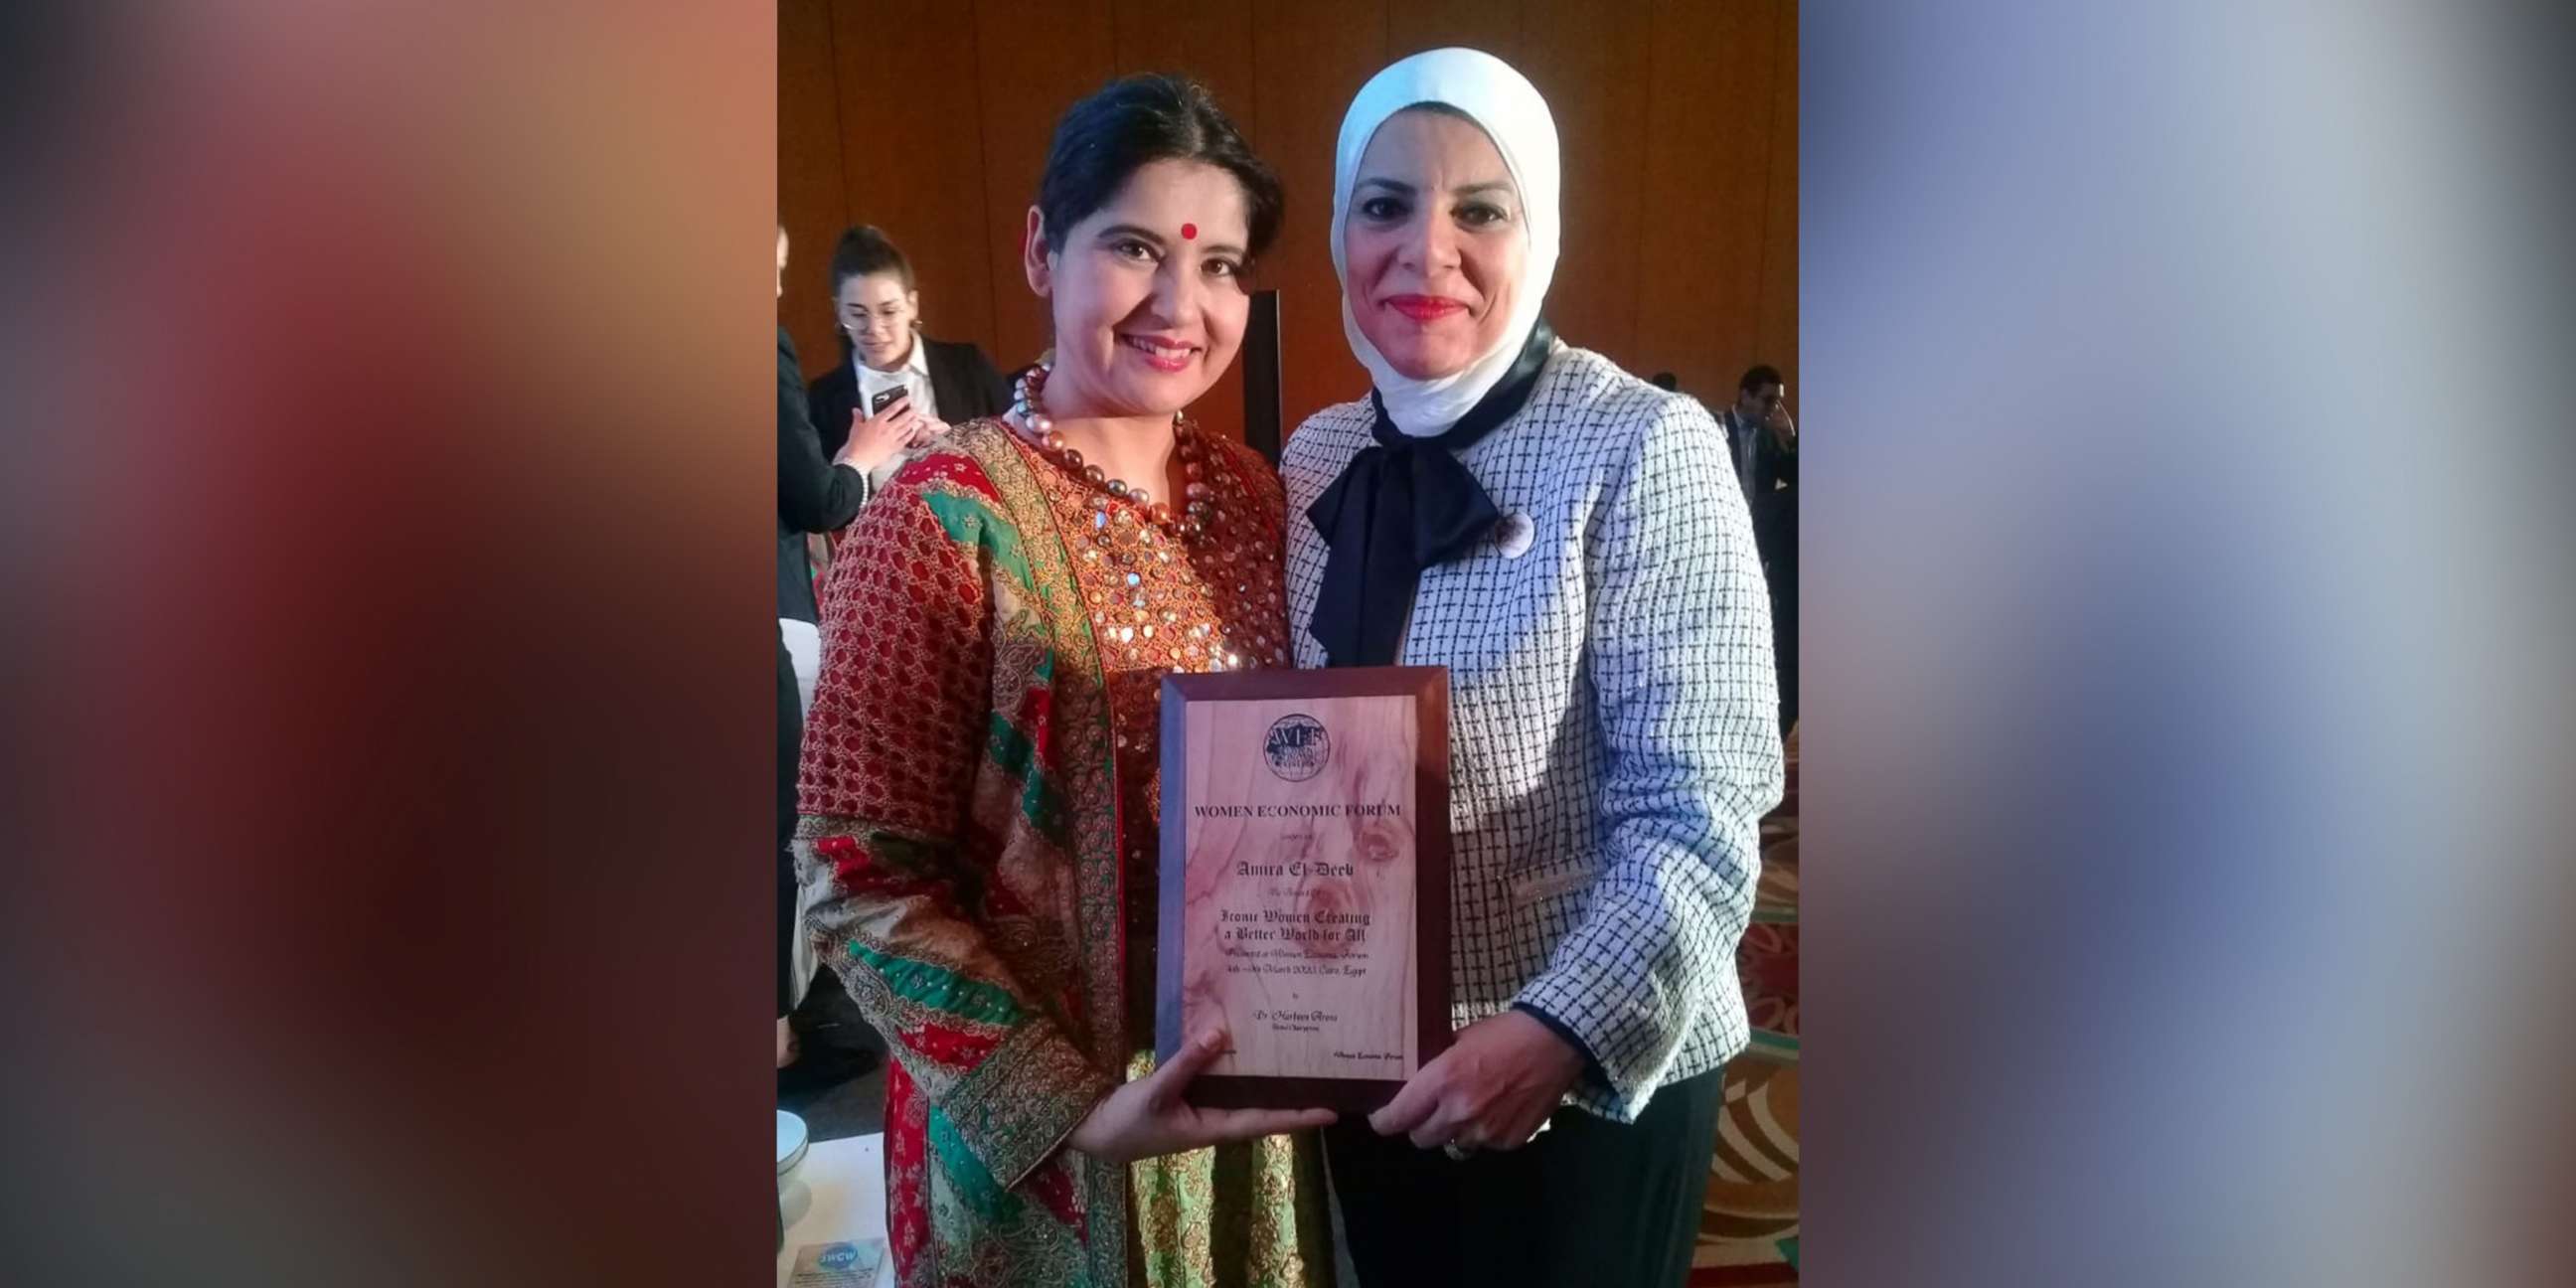 PHOTO: Amira El-Deeb, right, is pictured with Dr. Harbeen Arora, the founder of the Women's World Economic Forum at Women's World Economic Forum in Cairo, Egypt.